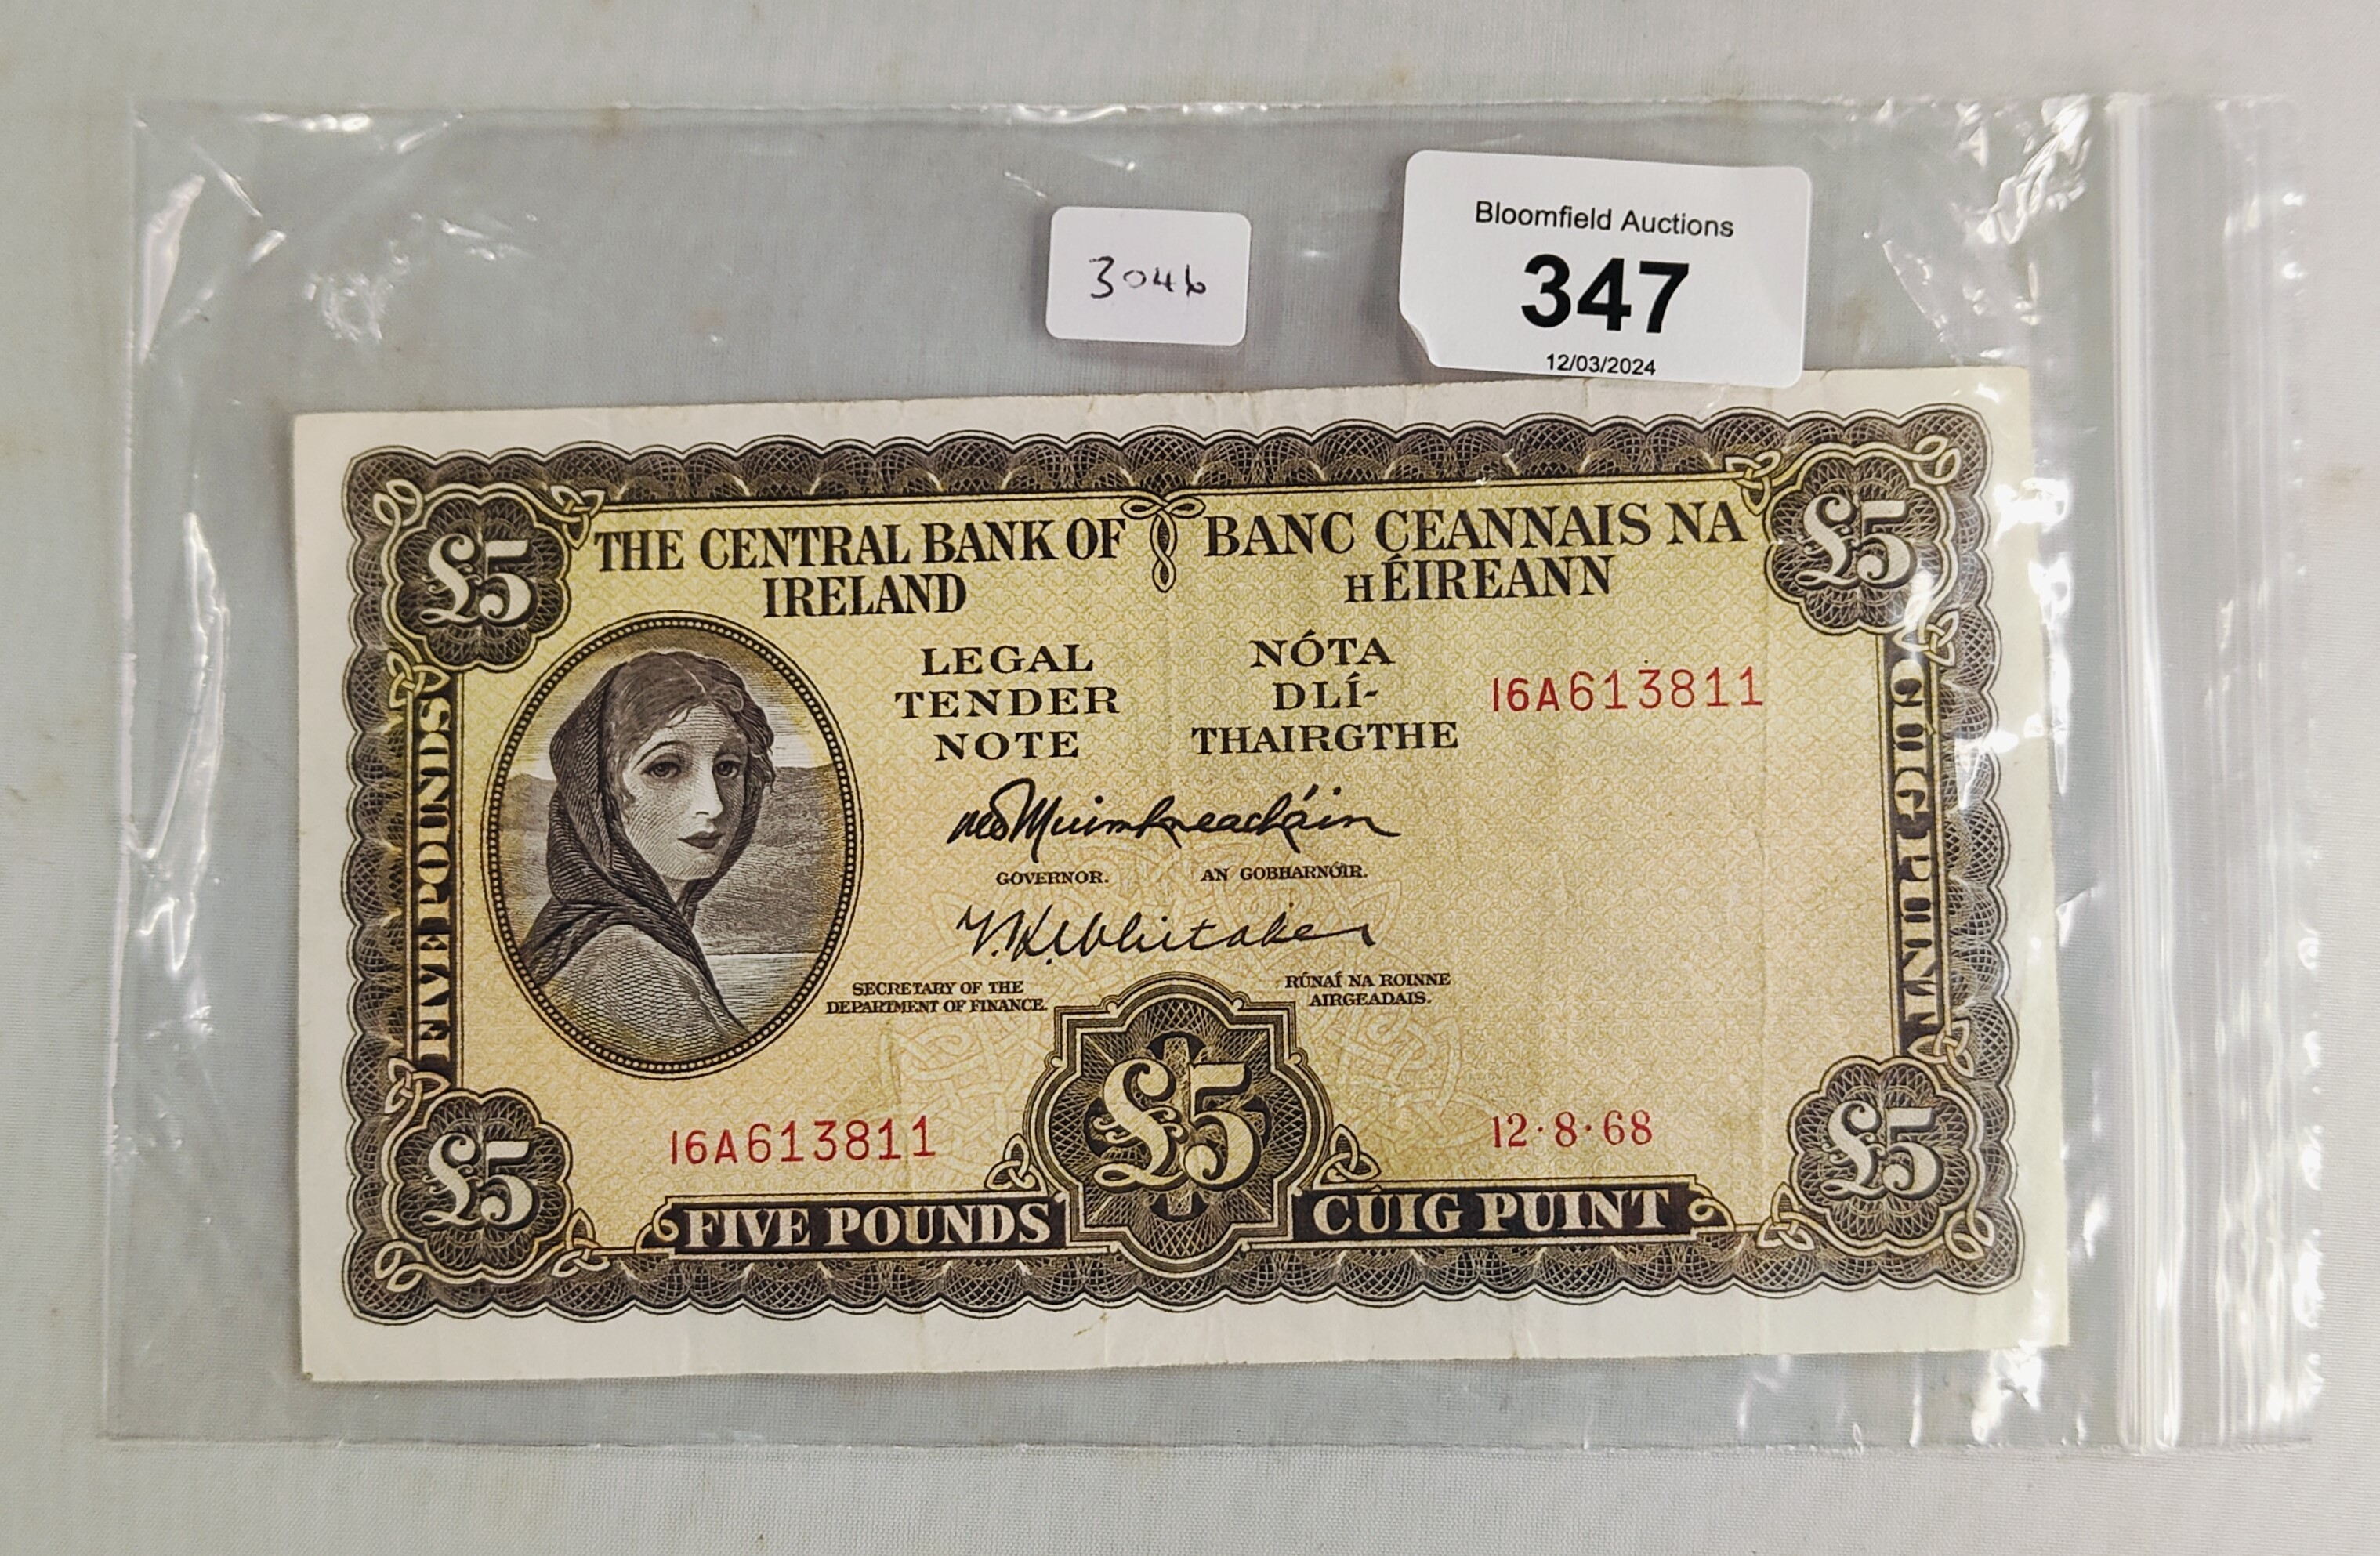 CENTRAL BANK OF IRELAND £5 LADY LAVERY BANKNOTE 12.8.68